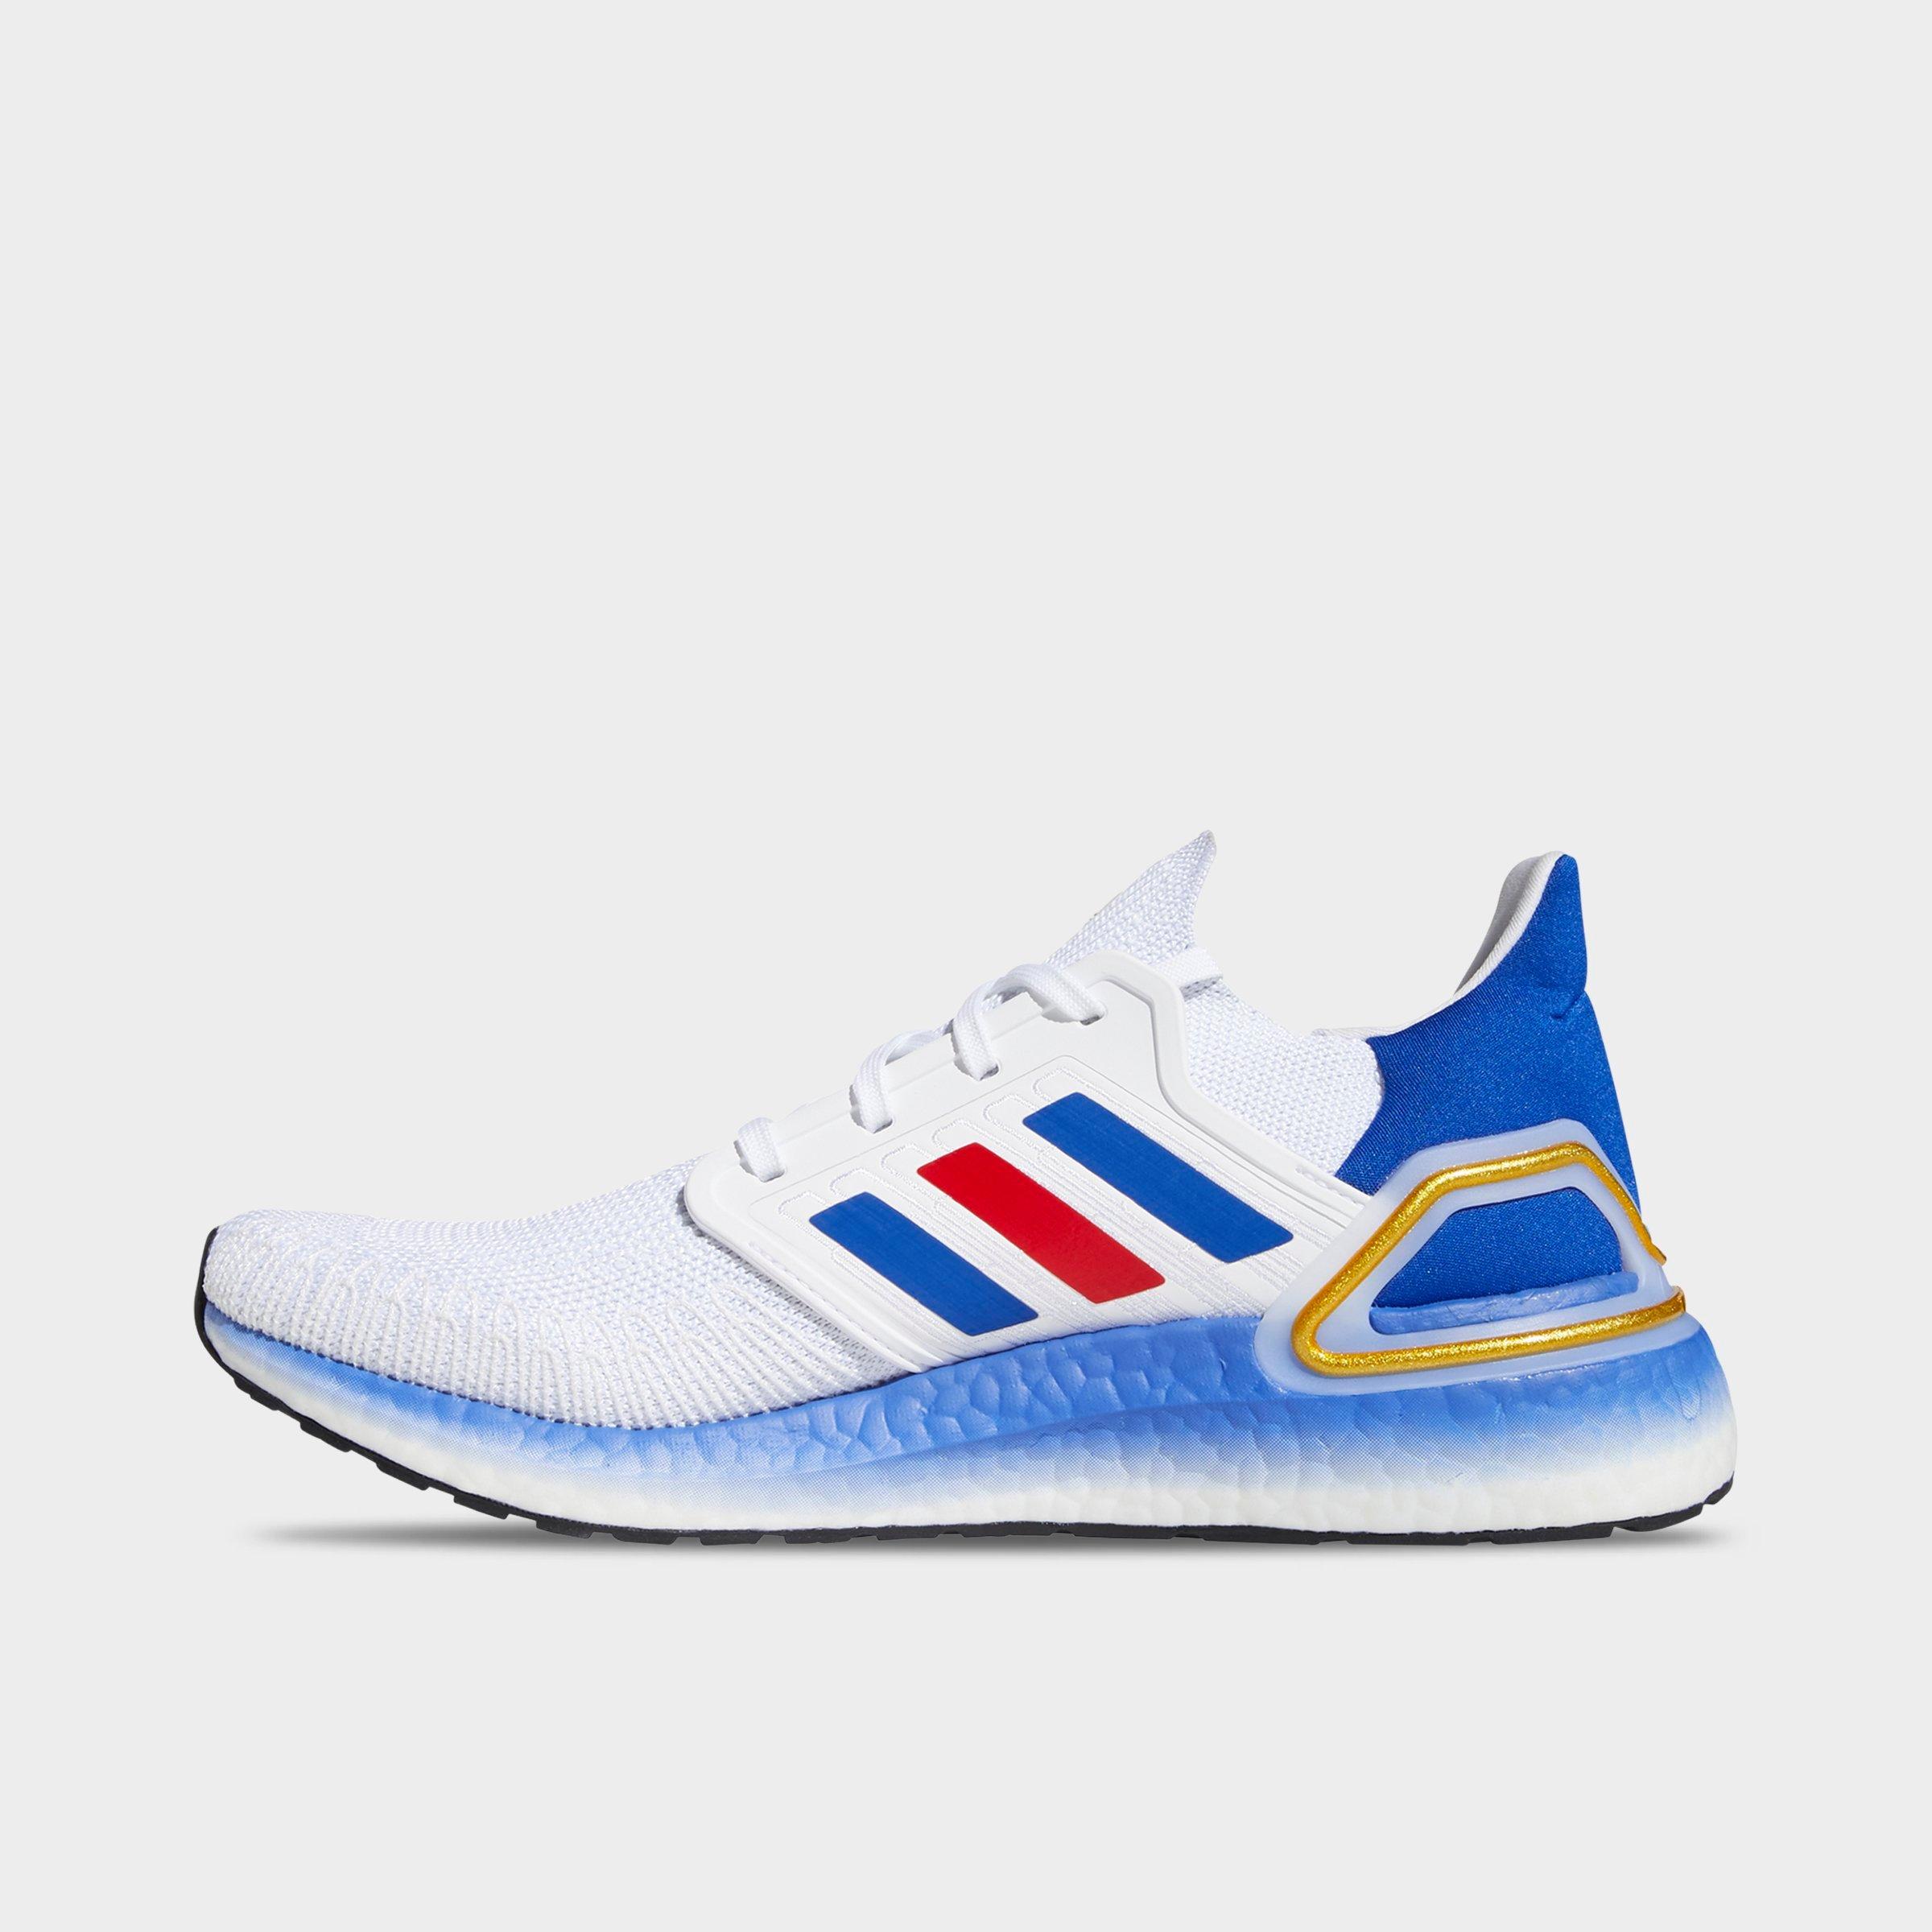 men's ultraboost running sneakers from finish line